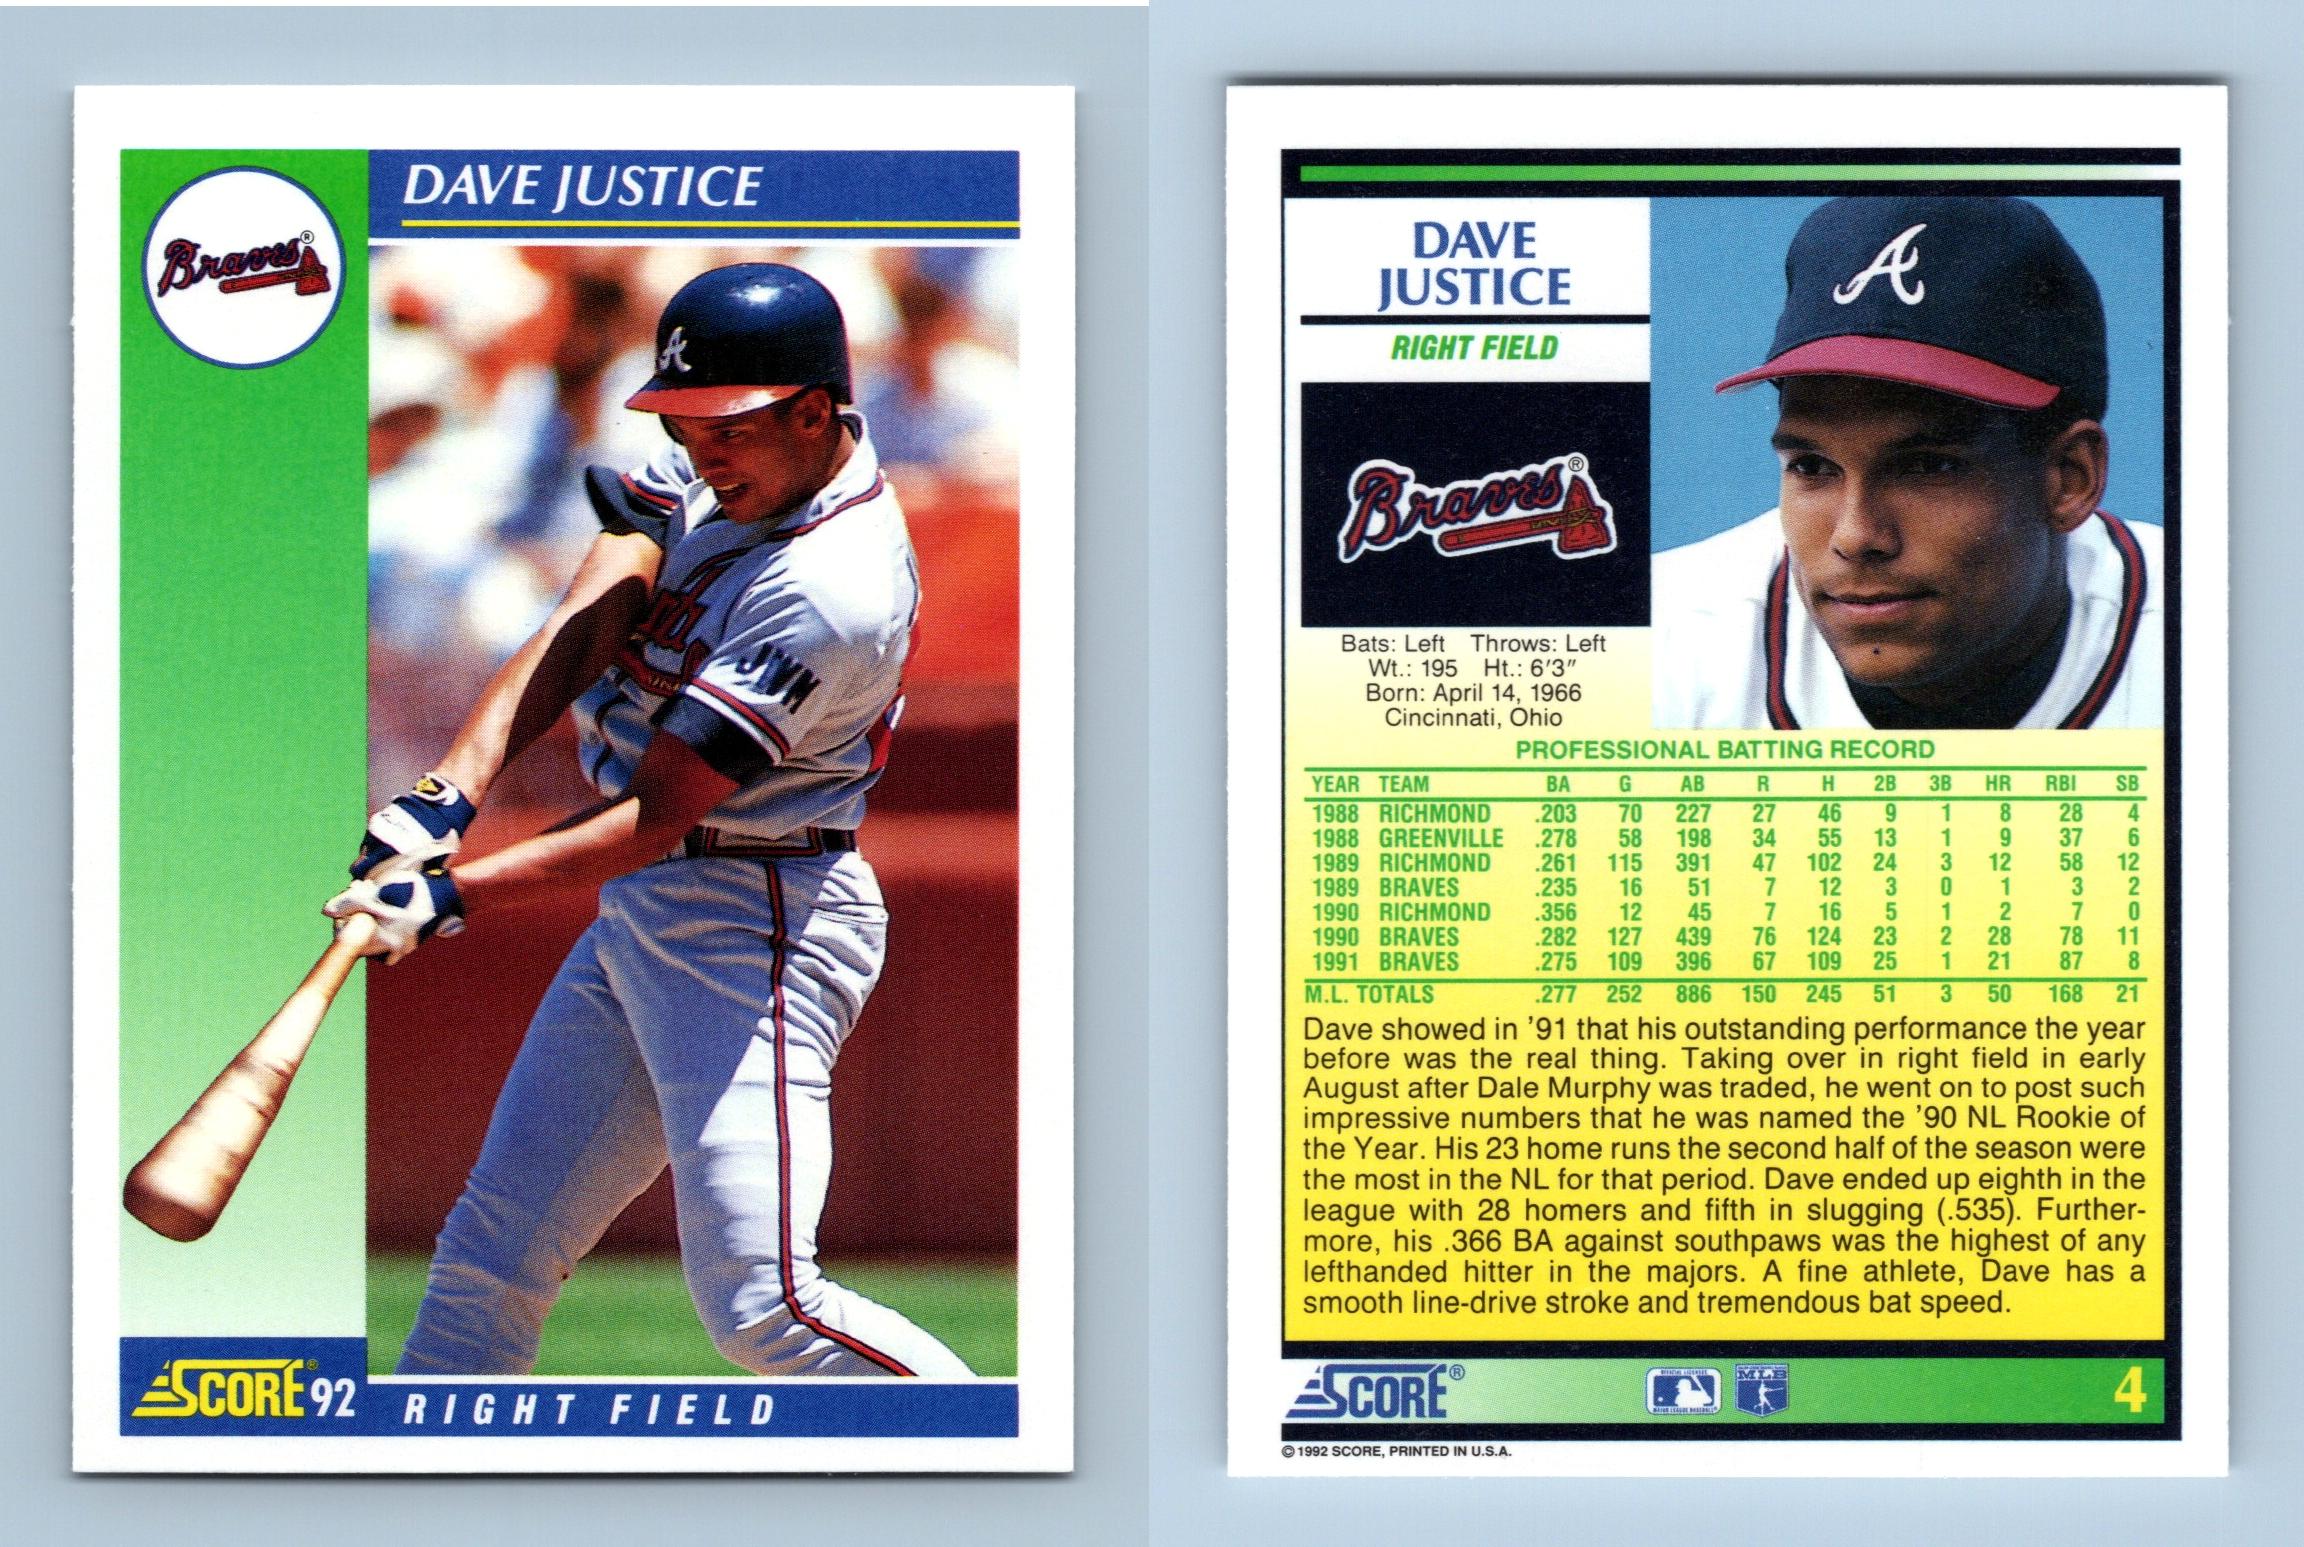 Dave Justice - Braves - #4 Score 1992 Baseball Trading Card